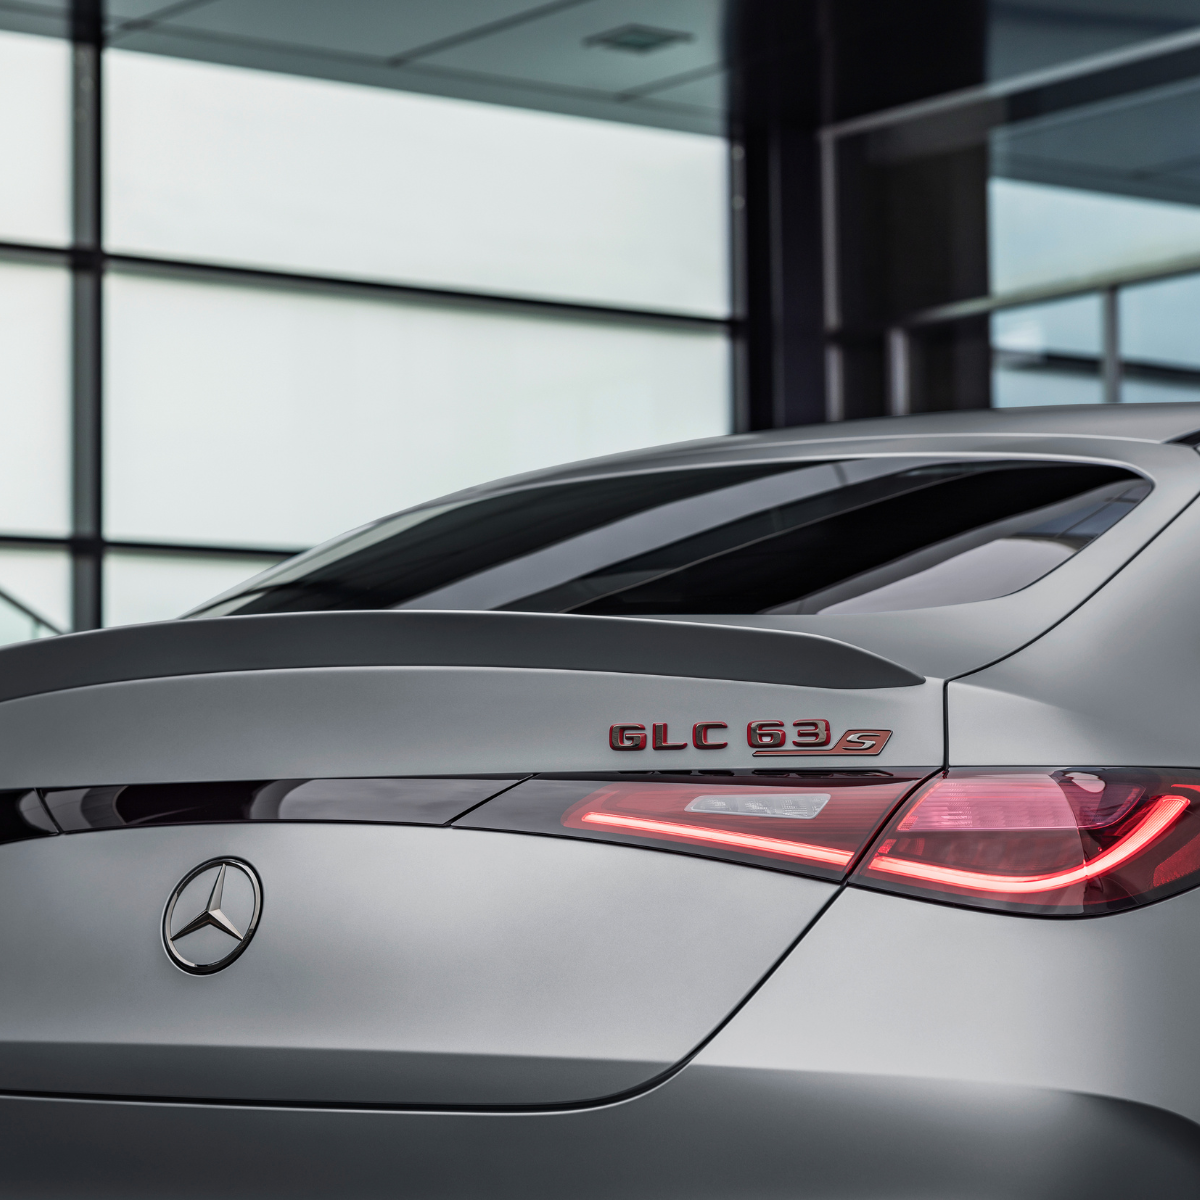 Mercedes-Benz Introduces the New Mercedes-AMG GLC Coupe